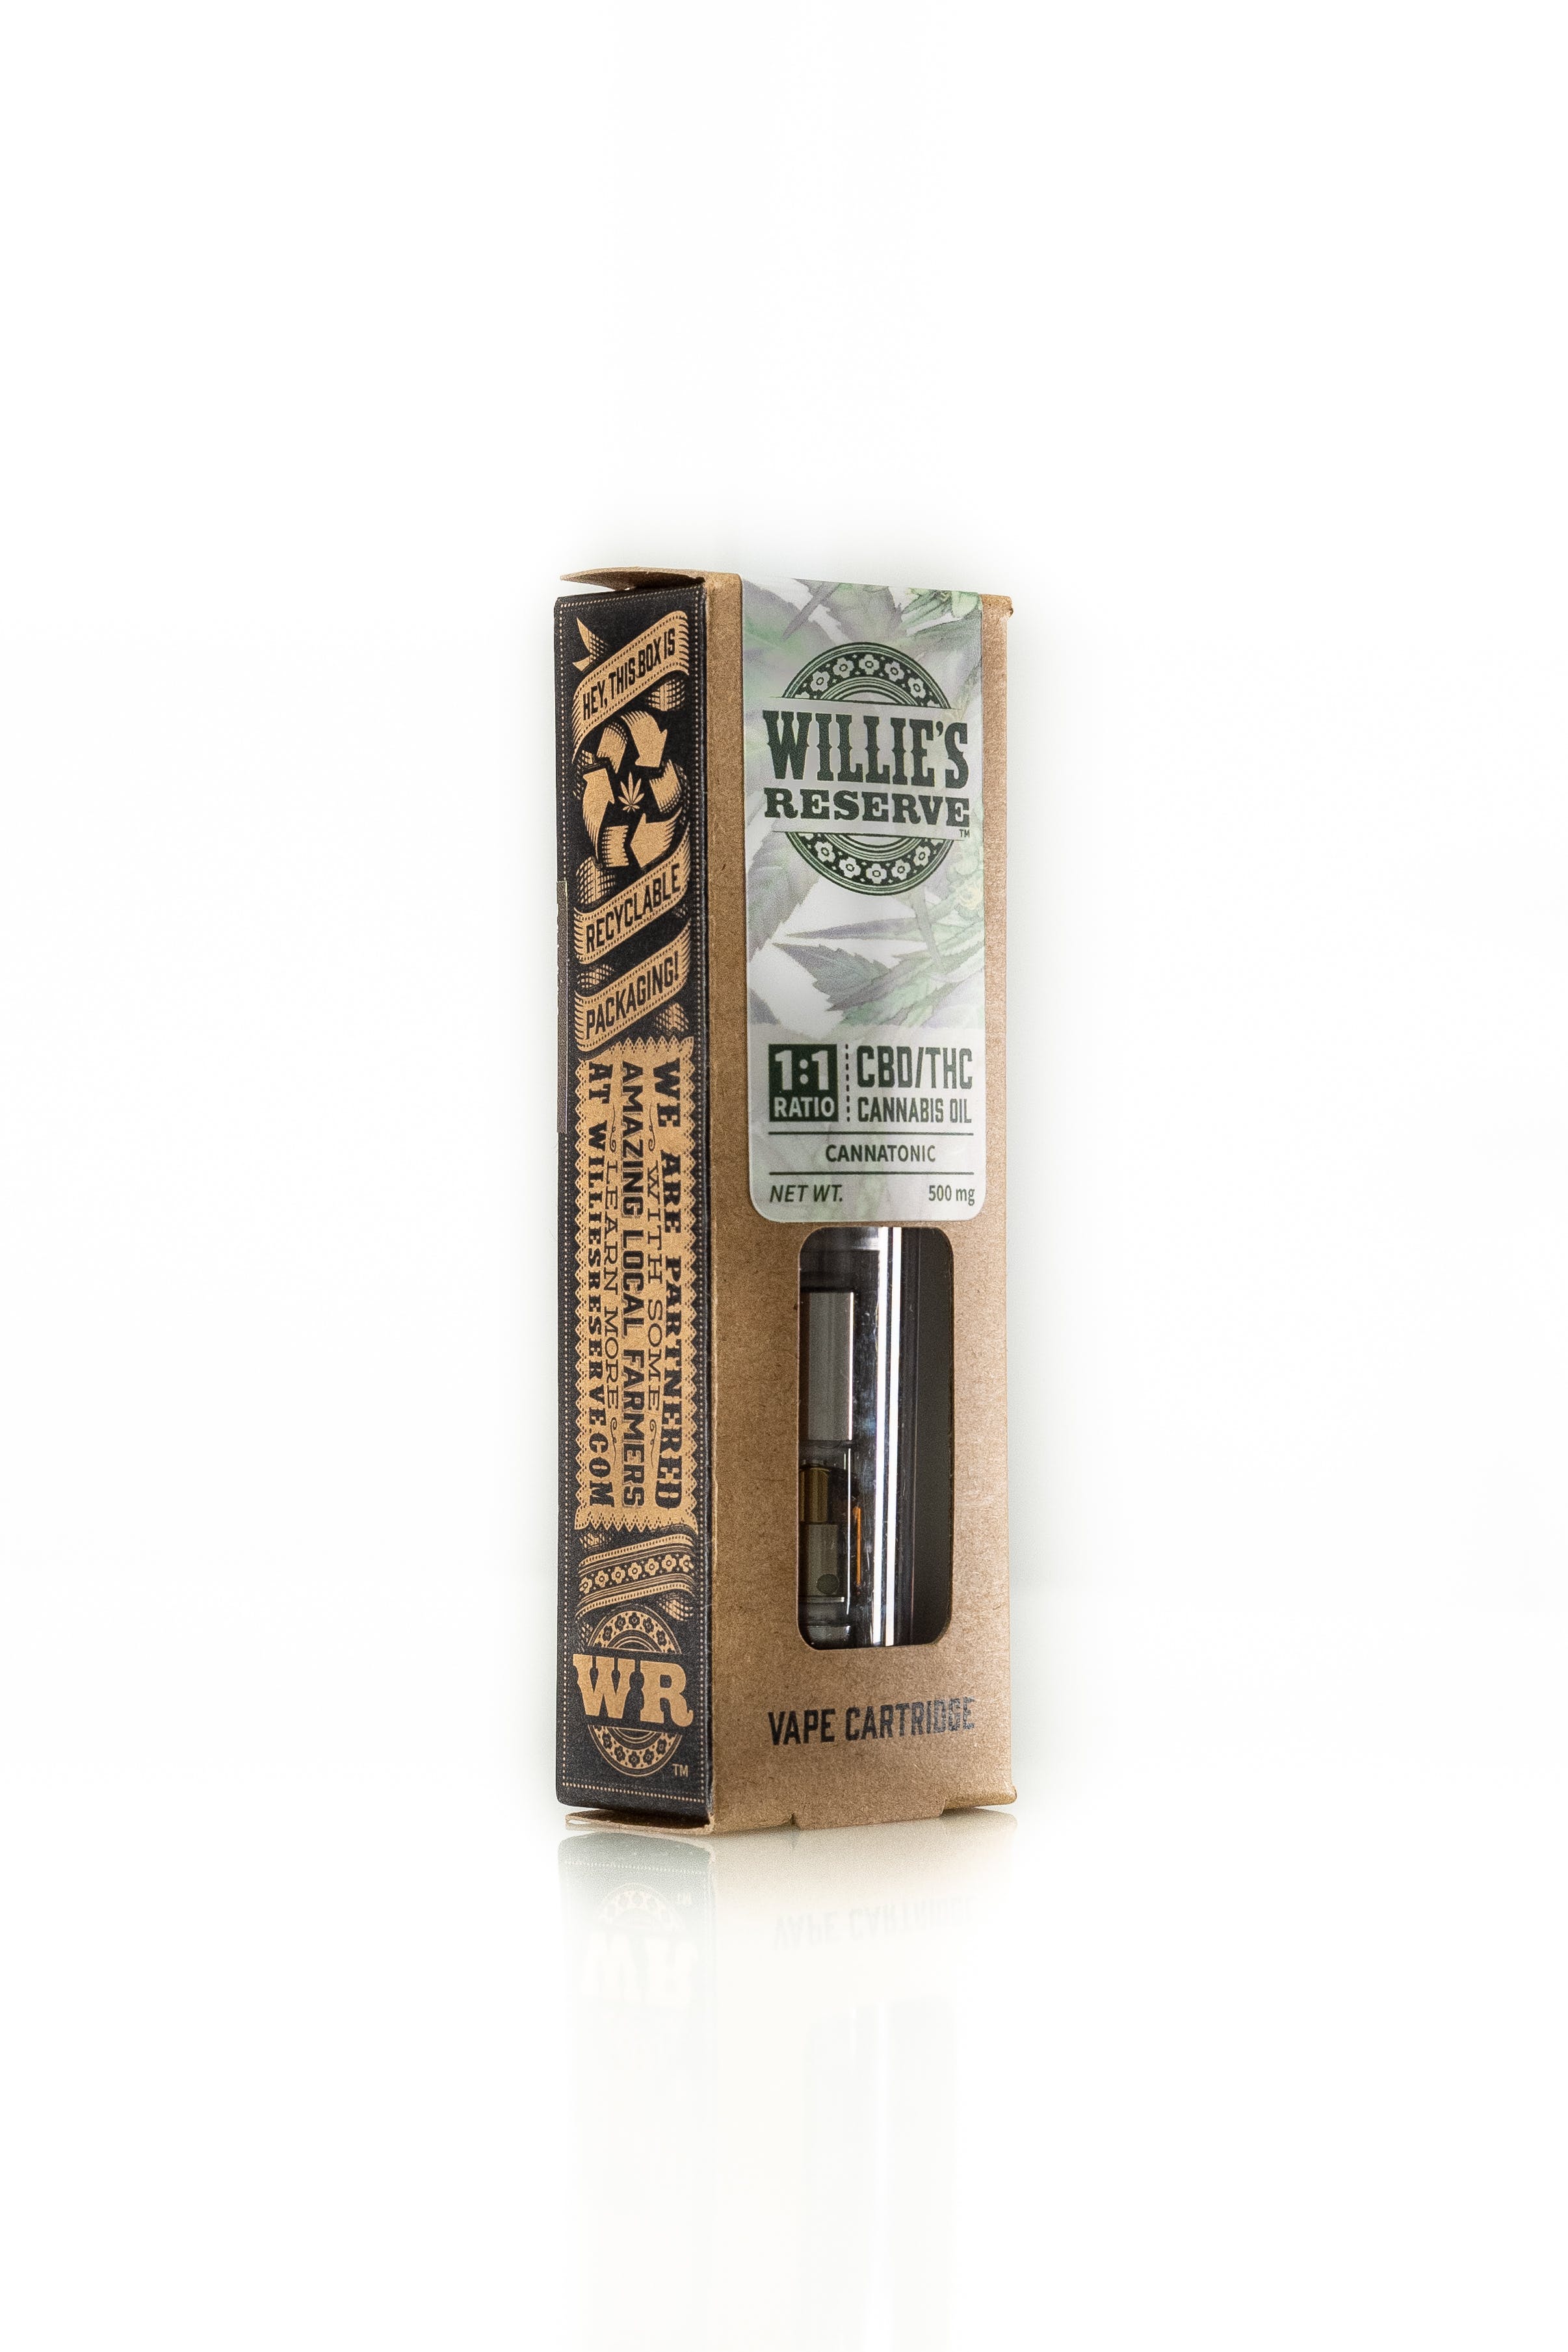 concentrate-willies-reserve-cannatonic-5g-cart